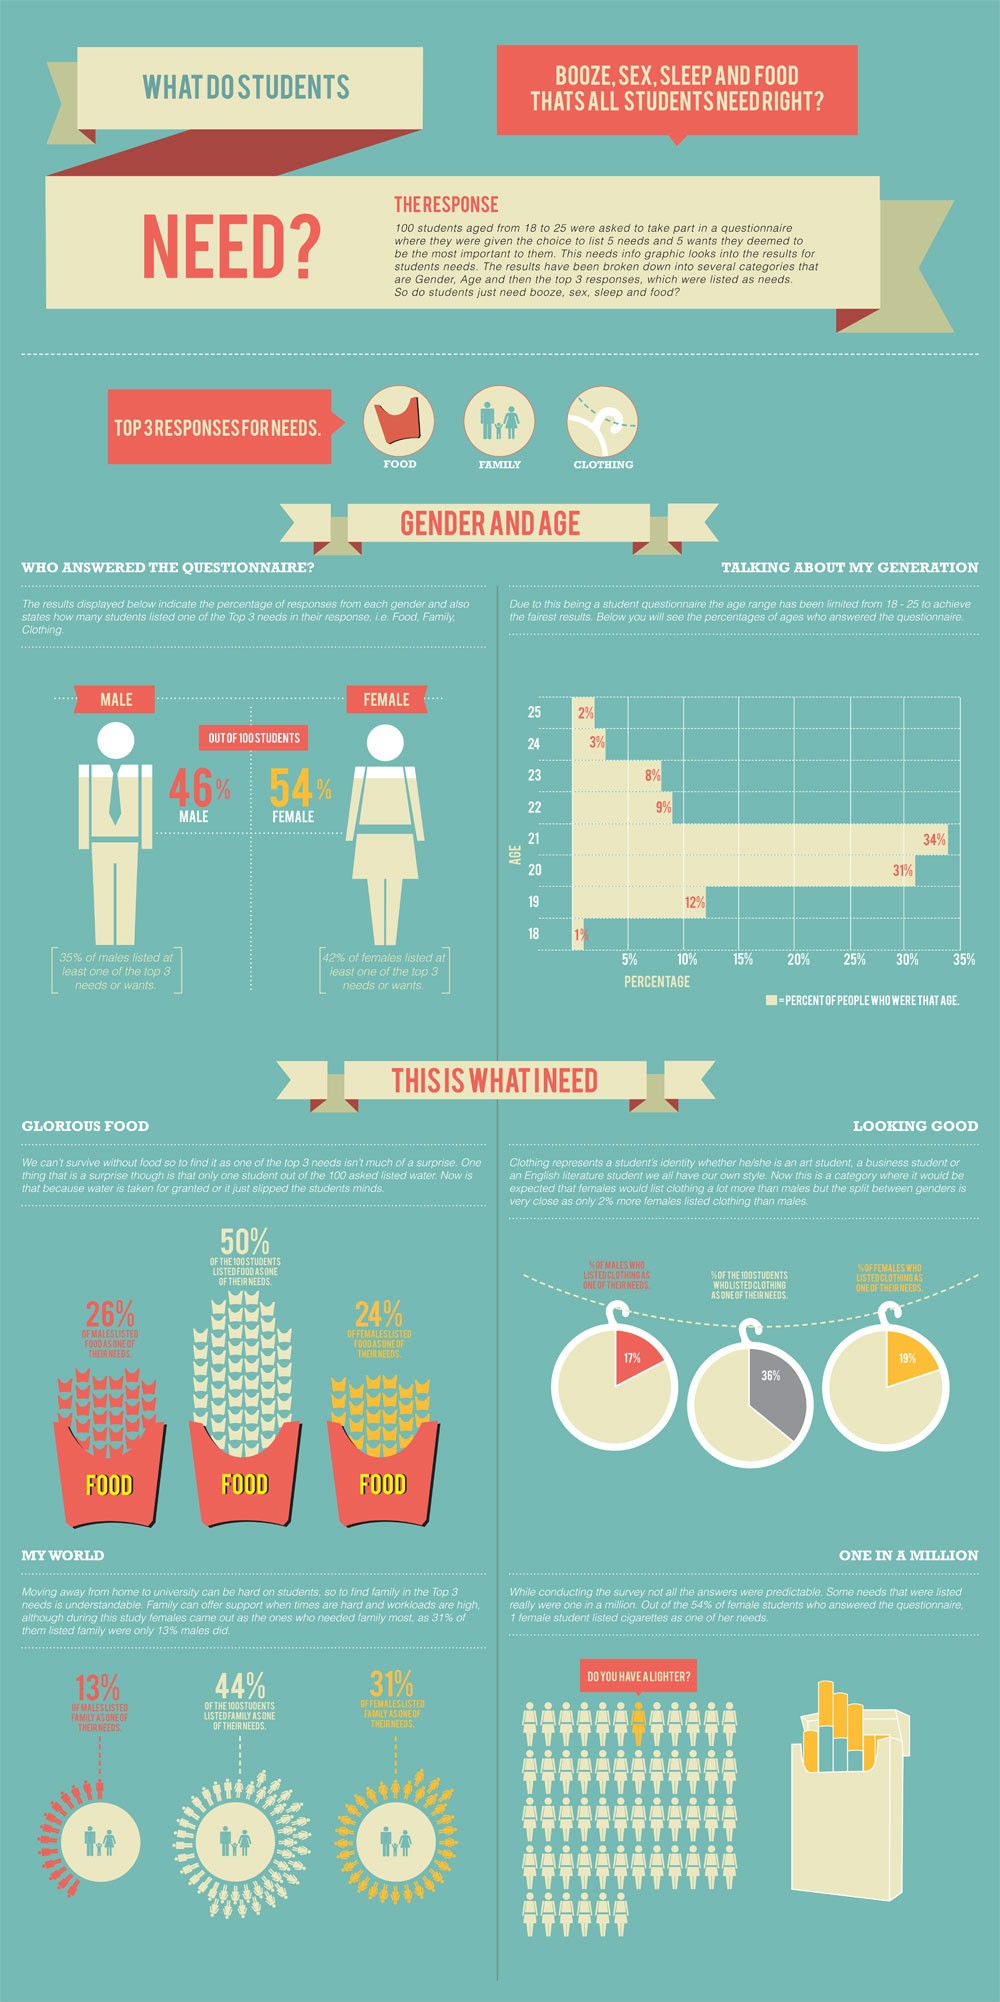 10 Creative Infographic Design Ideas to Inspire You | Lucidpress